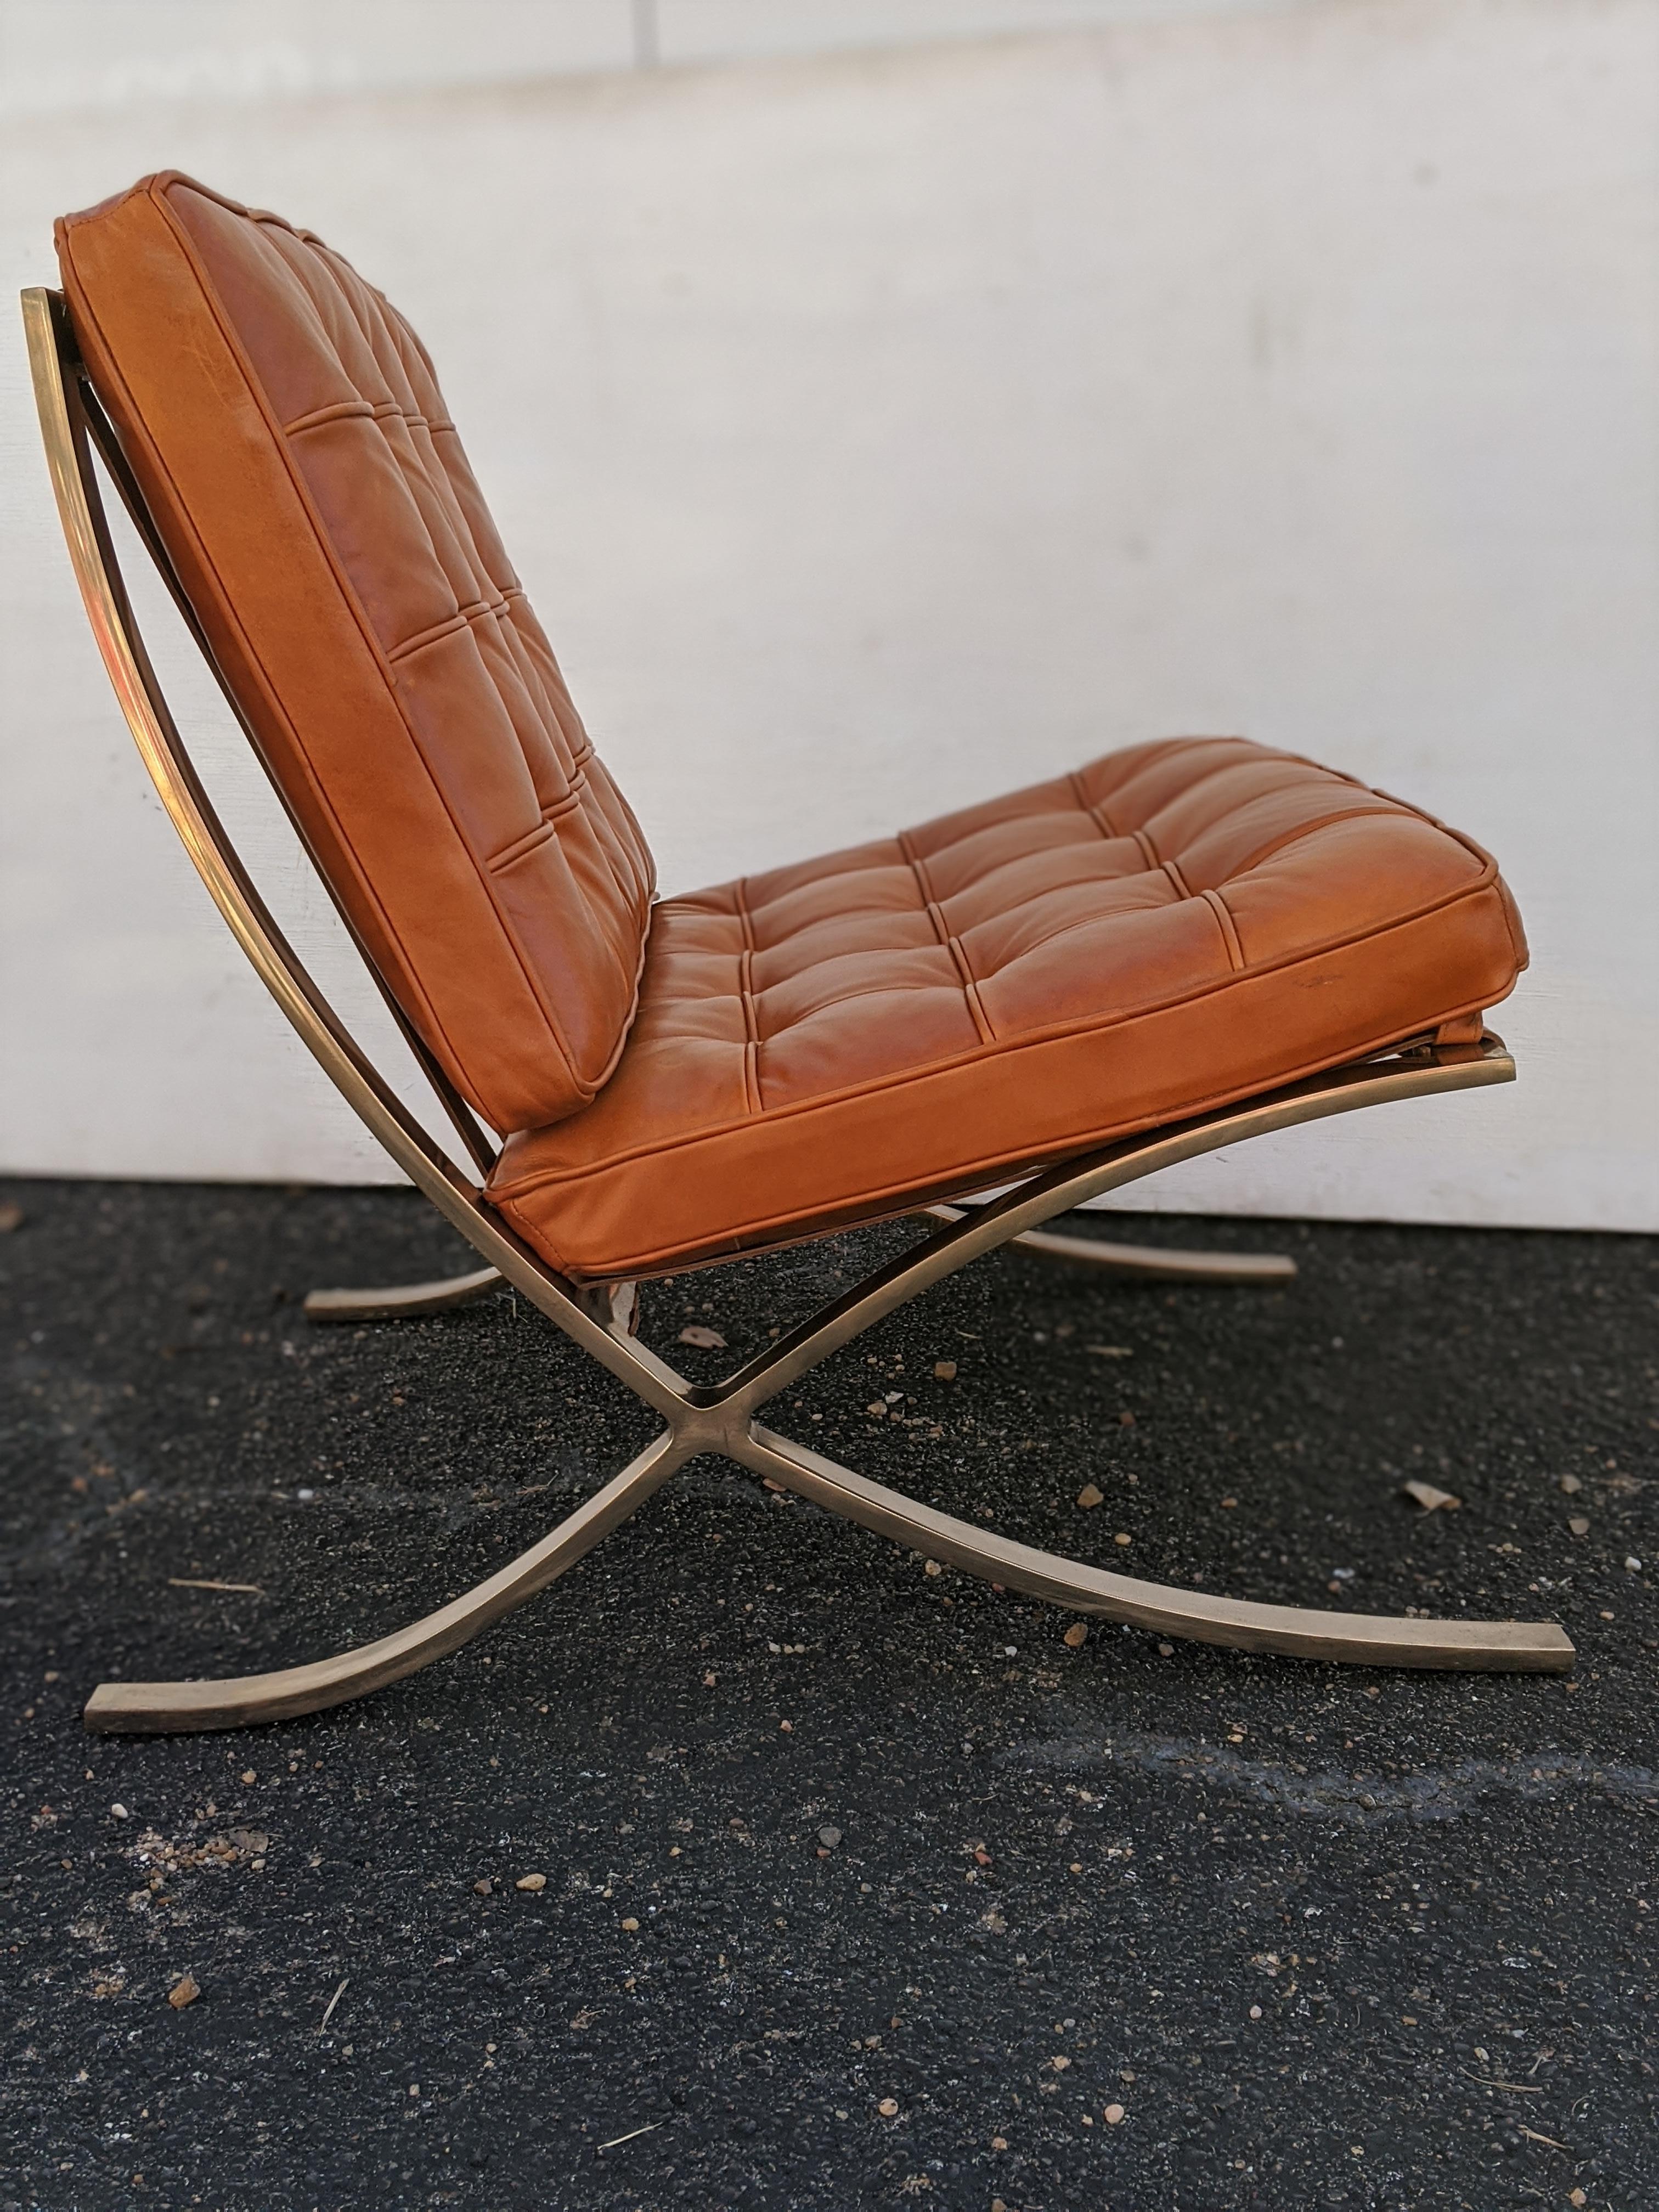 Mid-Century Modern Pair of Vintage Brass Barcelona Chairs designed by Mies van der Rohe for Knoll